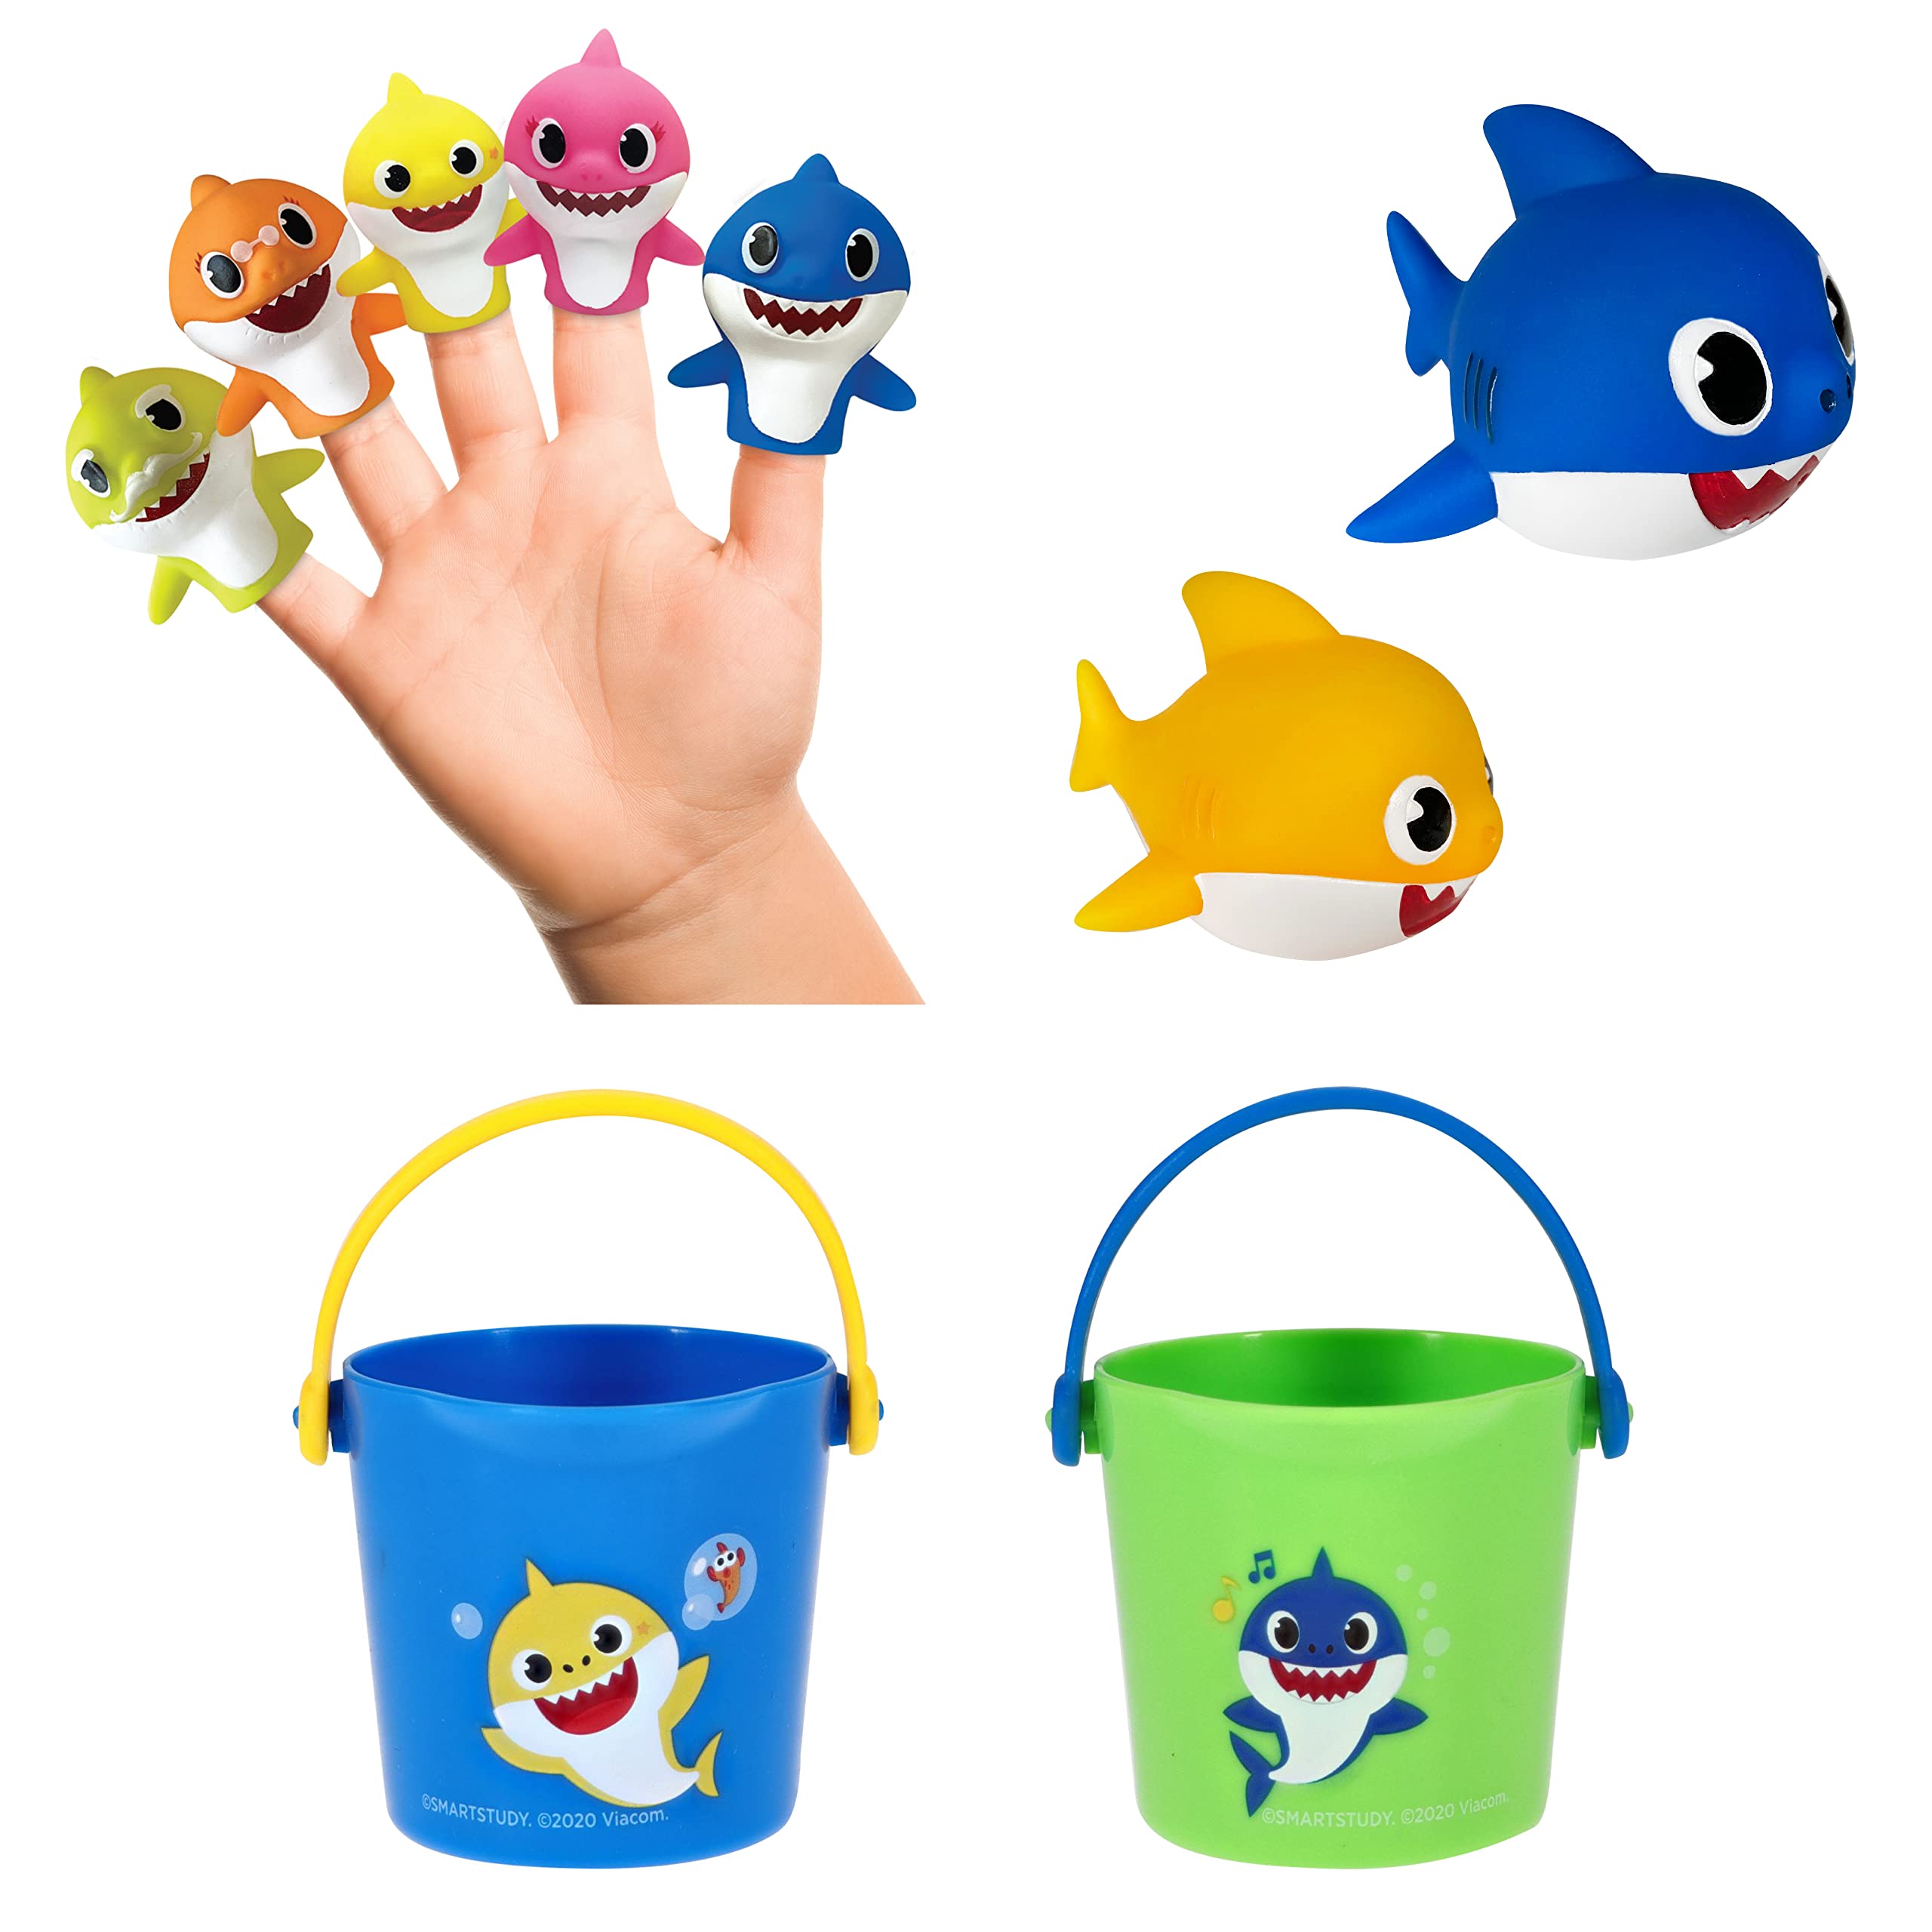 Nickelodeon Pink Fong Baby Shark Bath Toys Set for Children's Tub Time - Cups, Finger Puppets, and Bath Squirters, Blue/Green, 9 Pieces